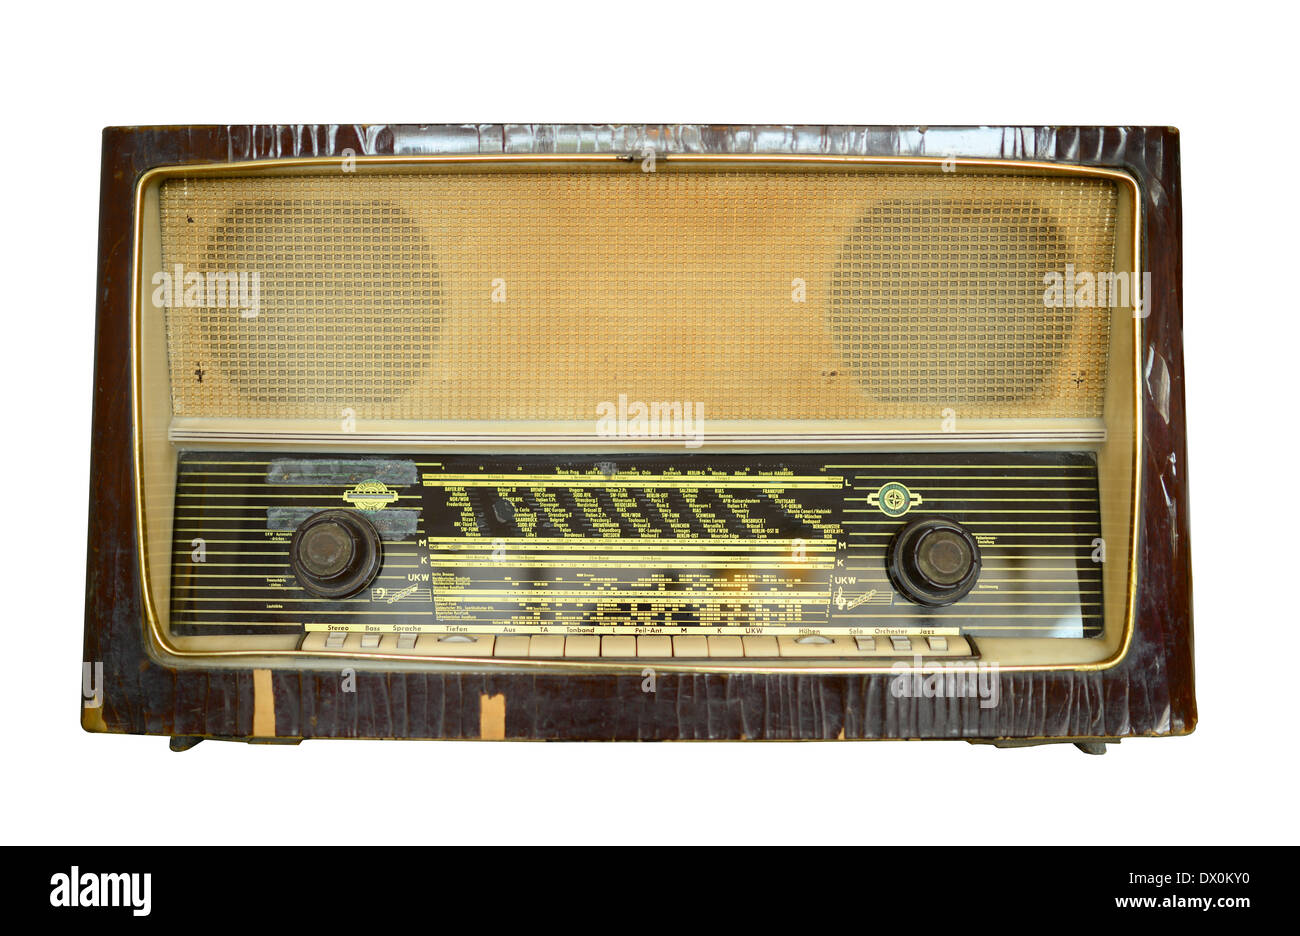 Vintage radio with clipping path Stock Photo